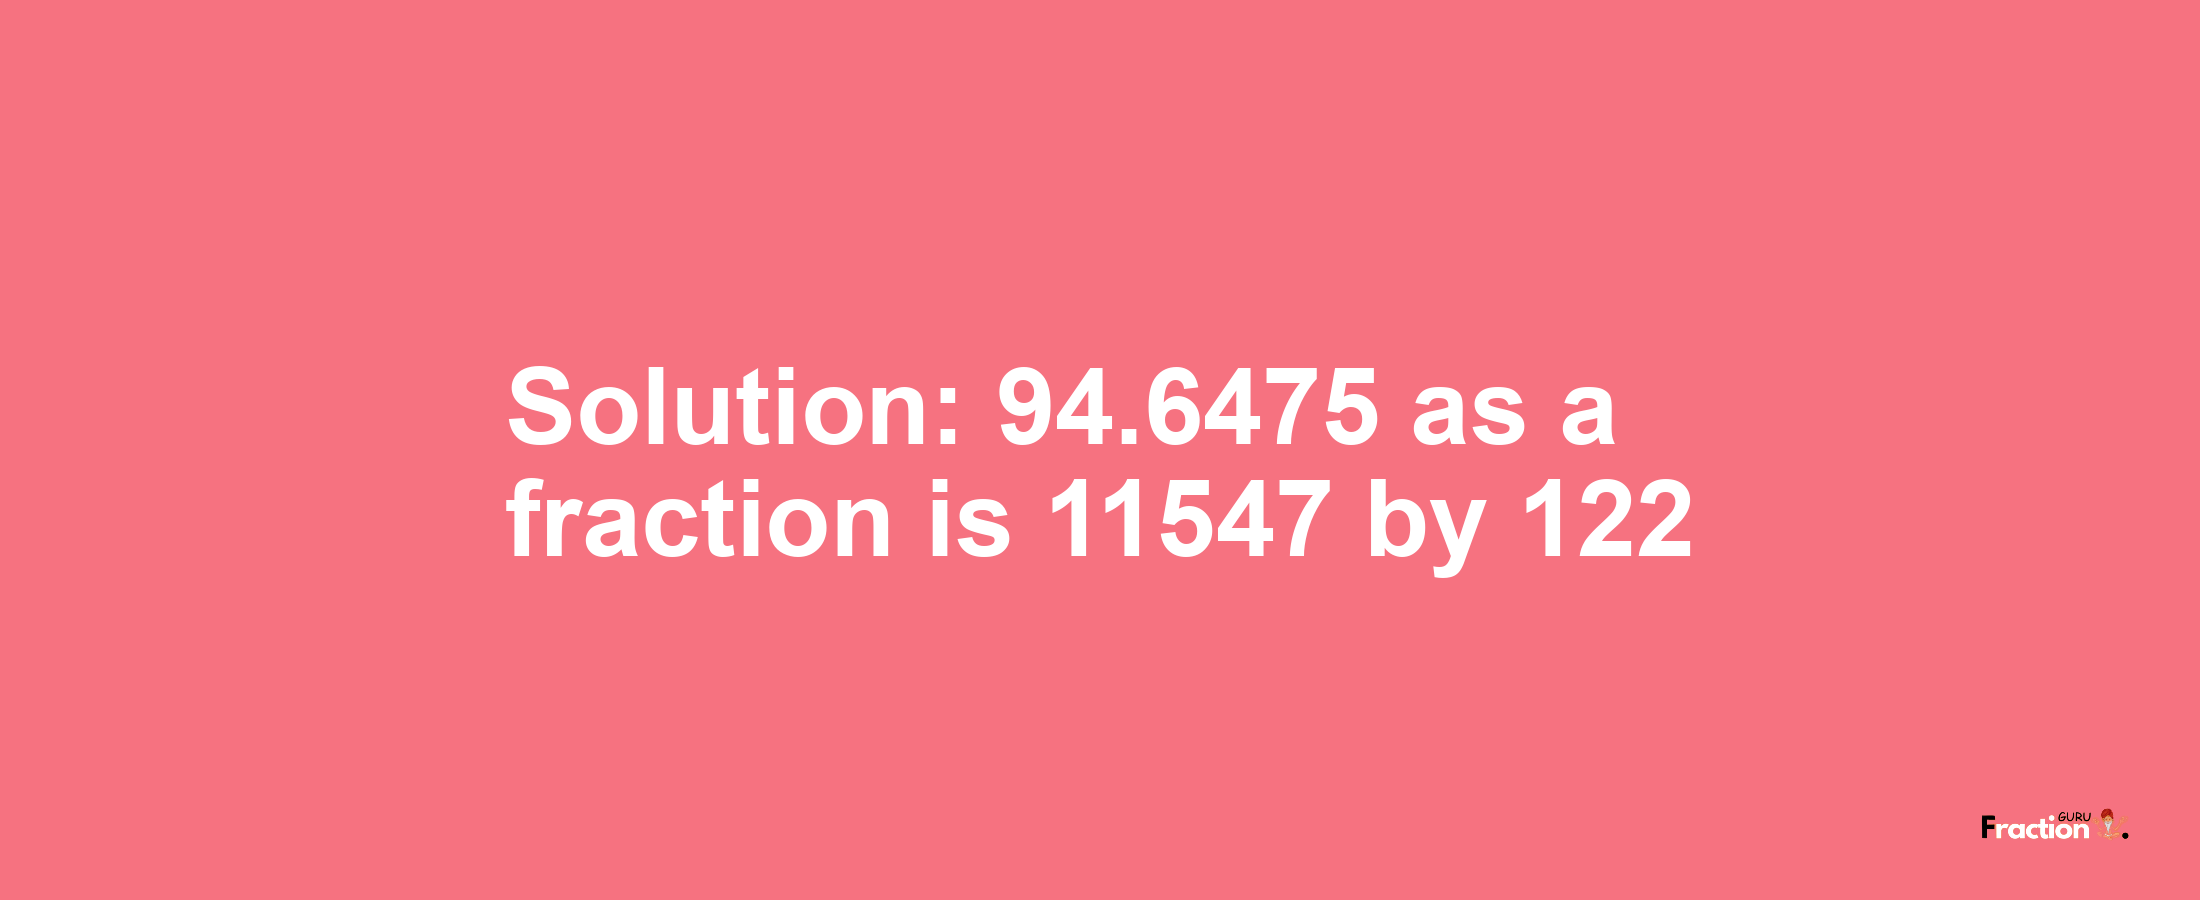 Solution:94.6475 as a fraction is 11547/122